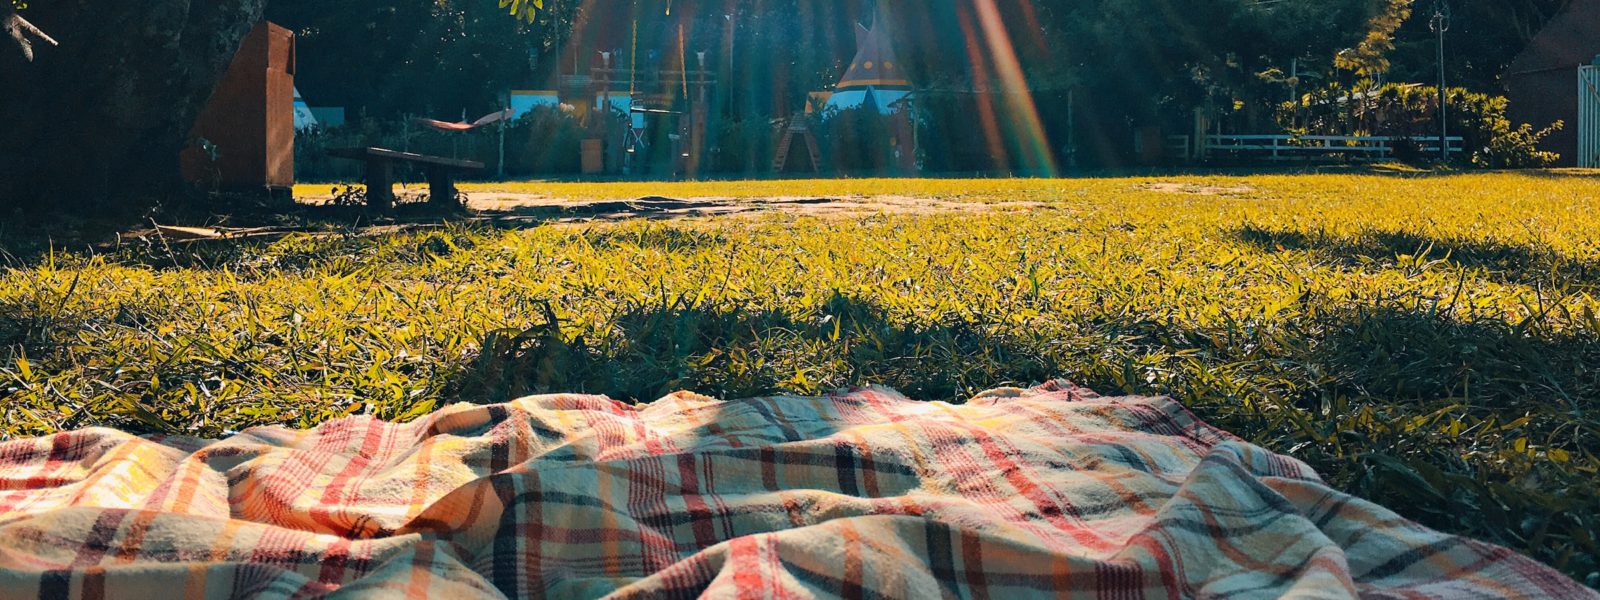 A plaid blanket on a grassy field in the sunlight